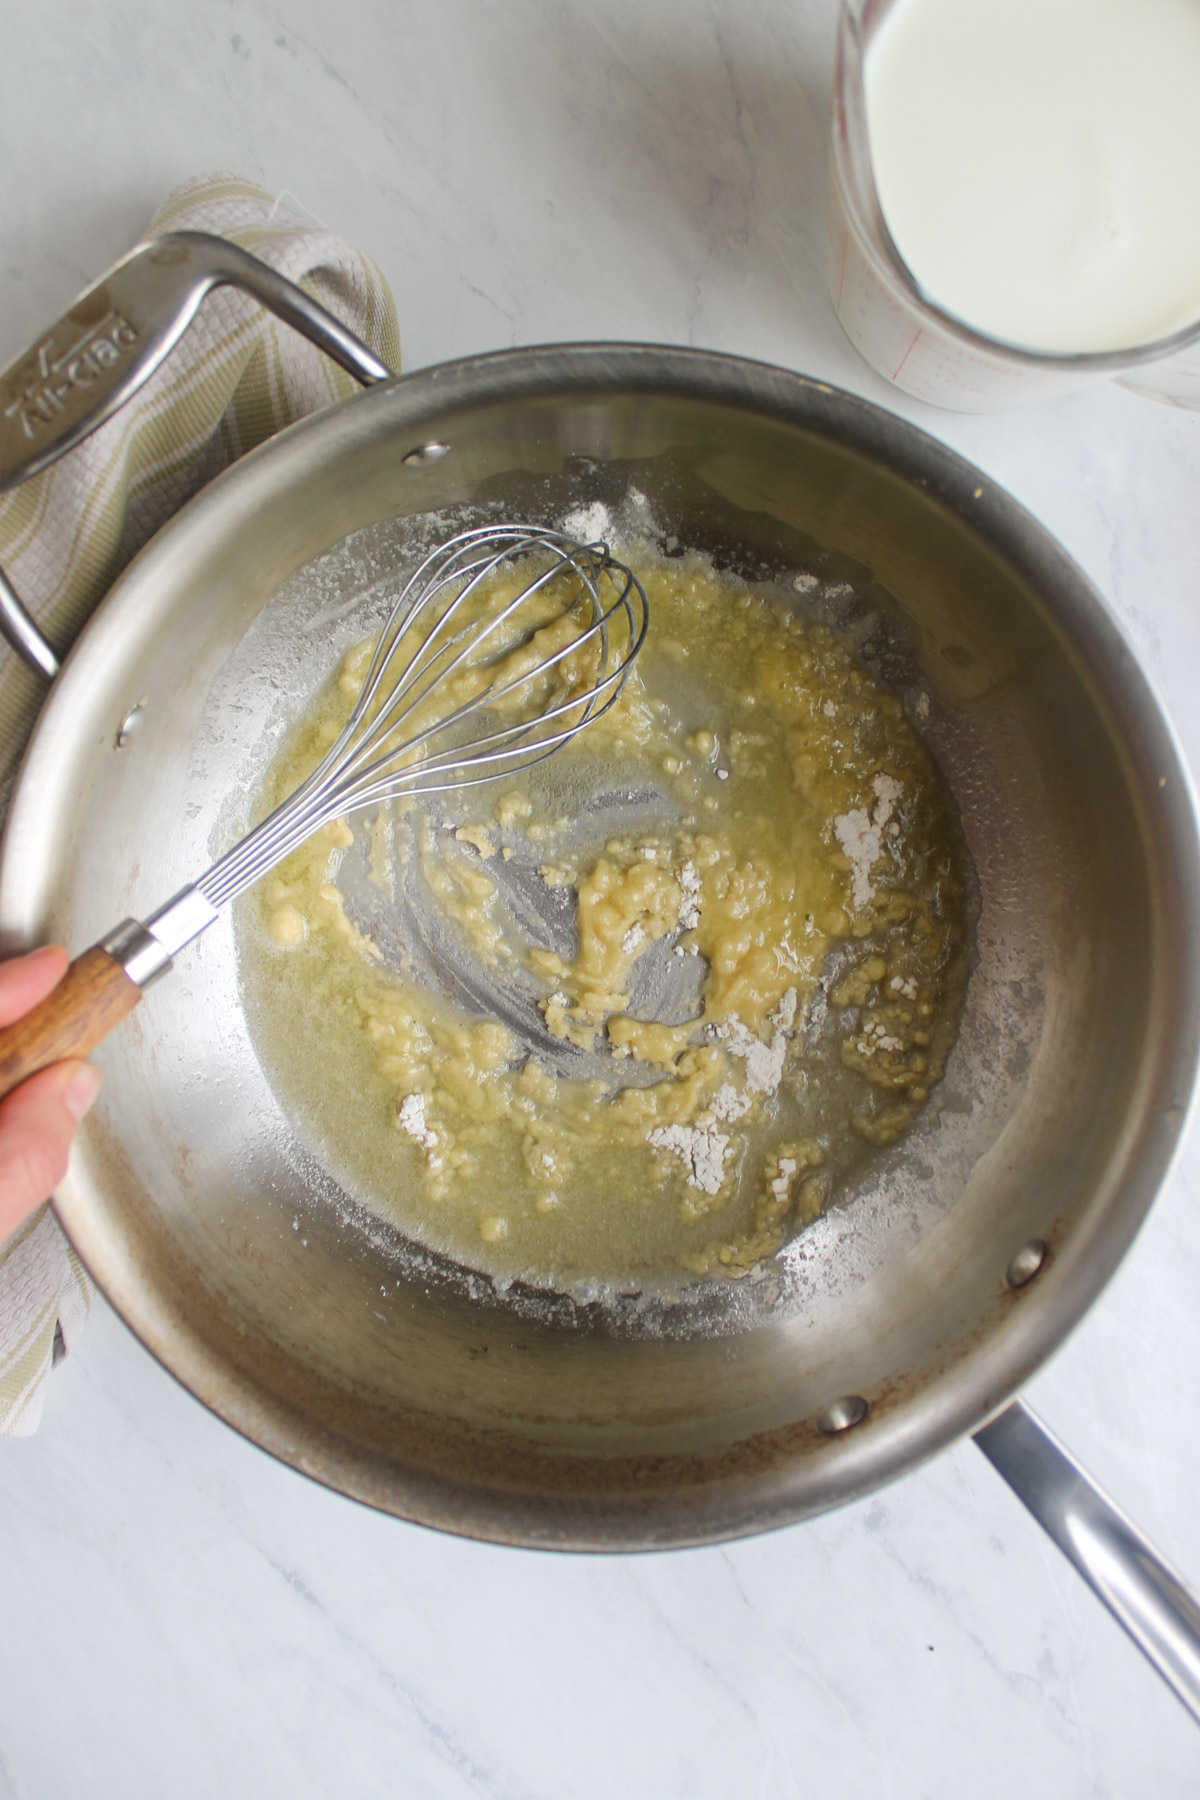 Whisking butter and flour together to form a roux, the thickener for broccoli au gratin sauce.